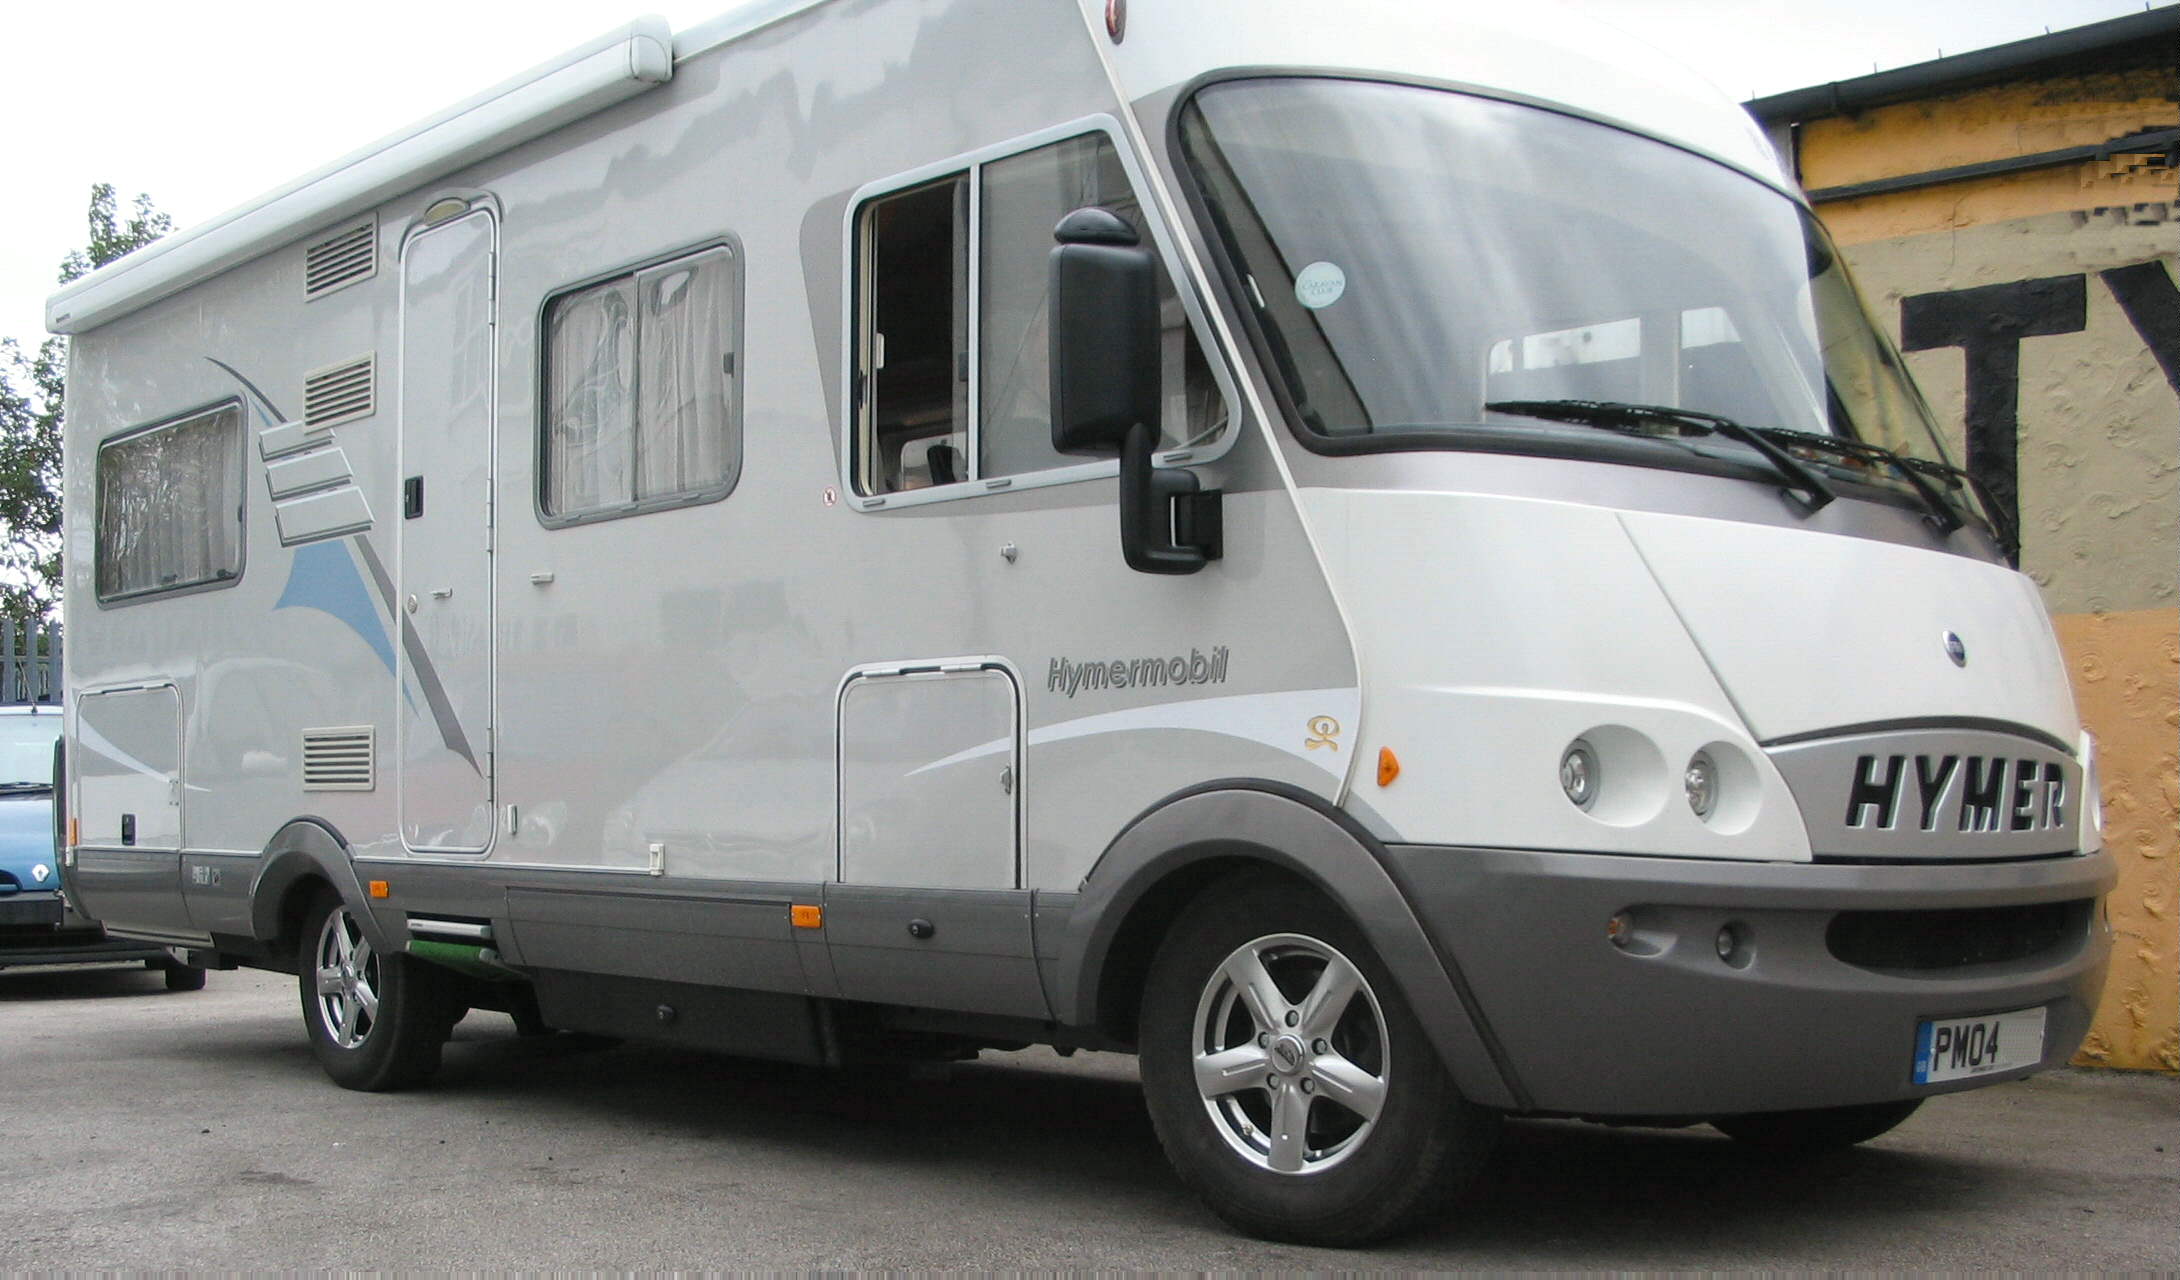 16" Rimfire Alloys and 215/75R16 tyres on Hymer Fiat Ducato